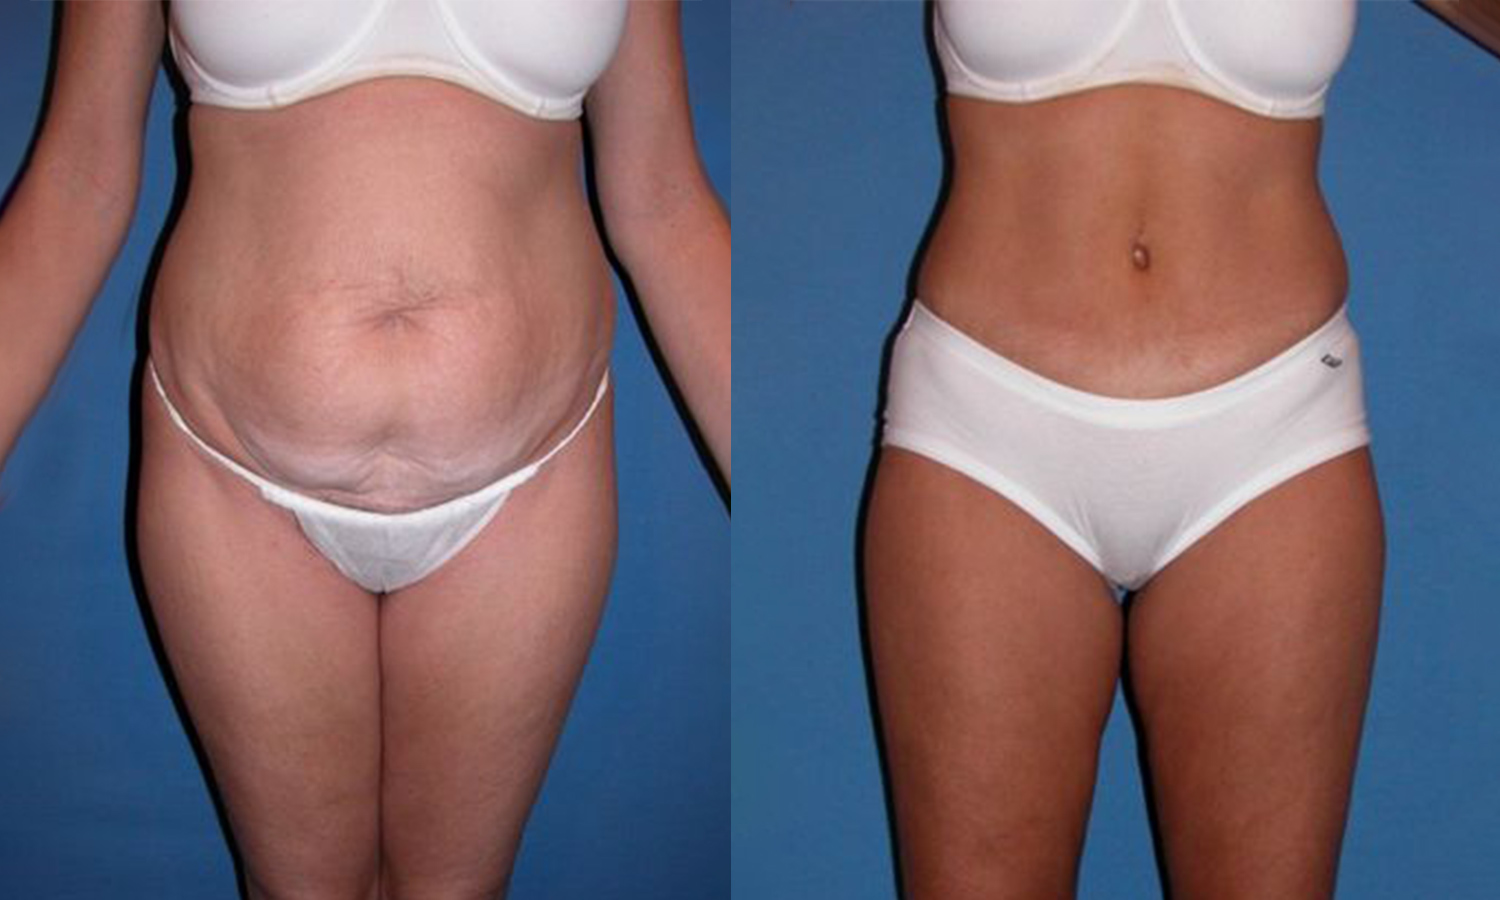 Surprising health benefits of a tummy tuck panty